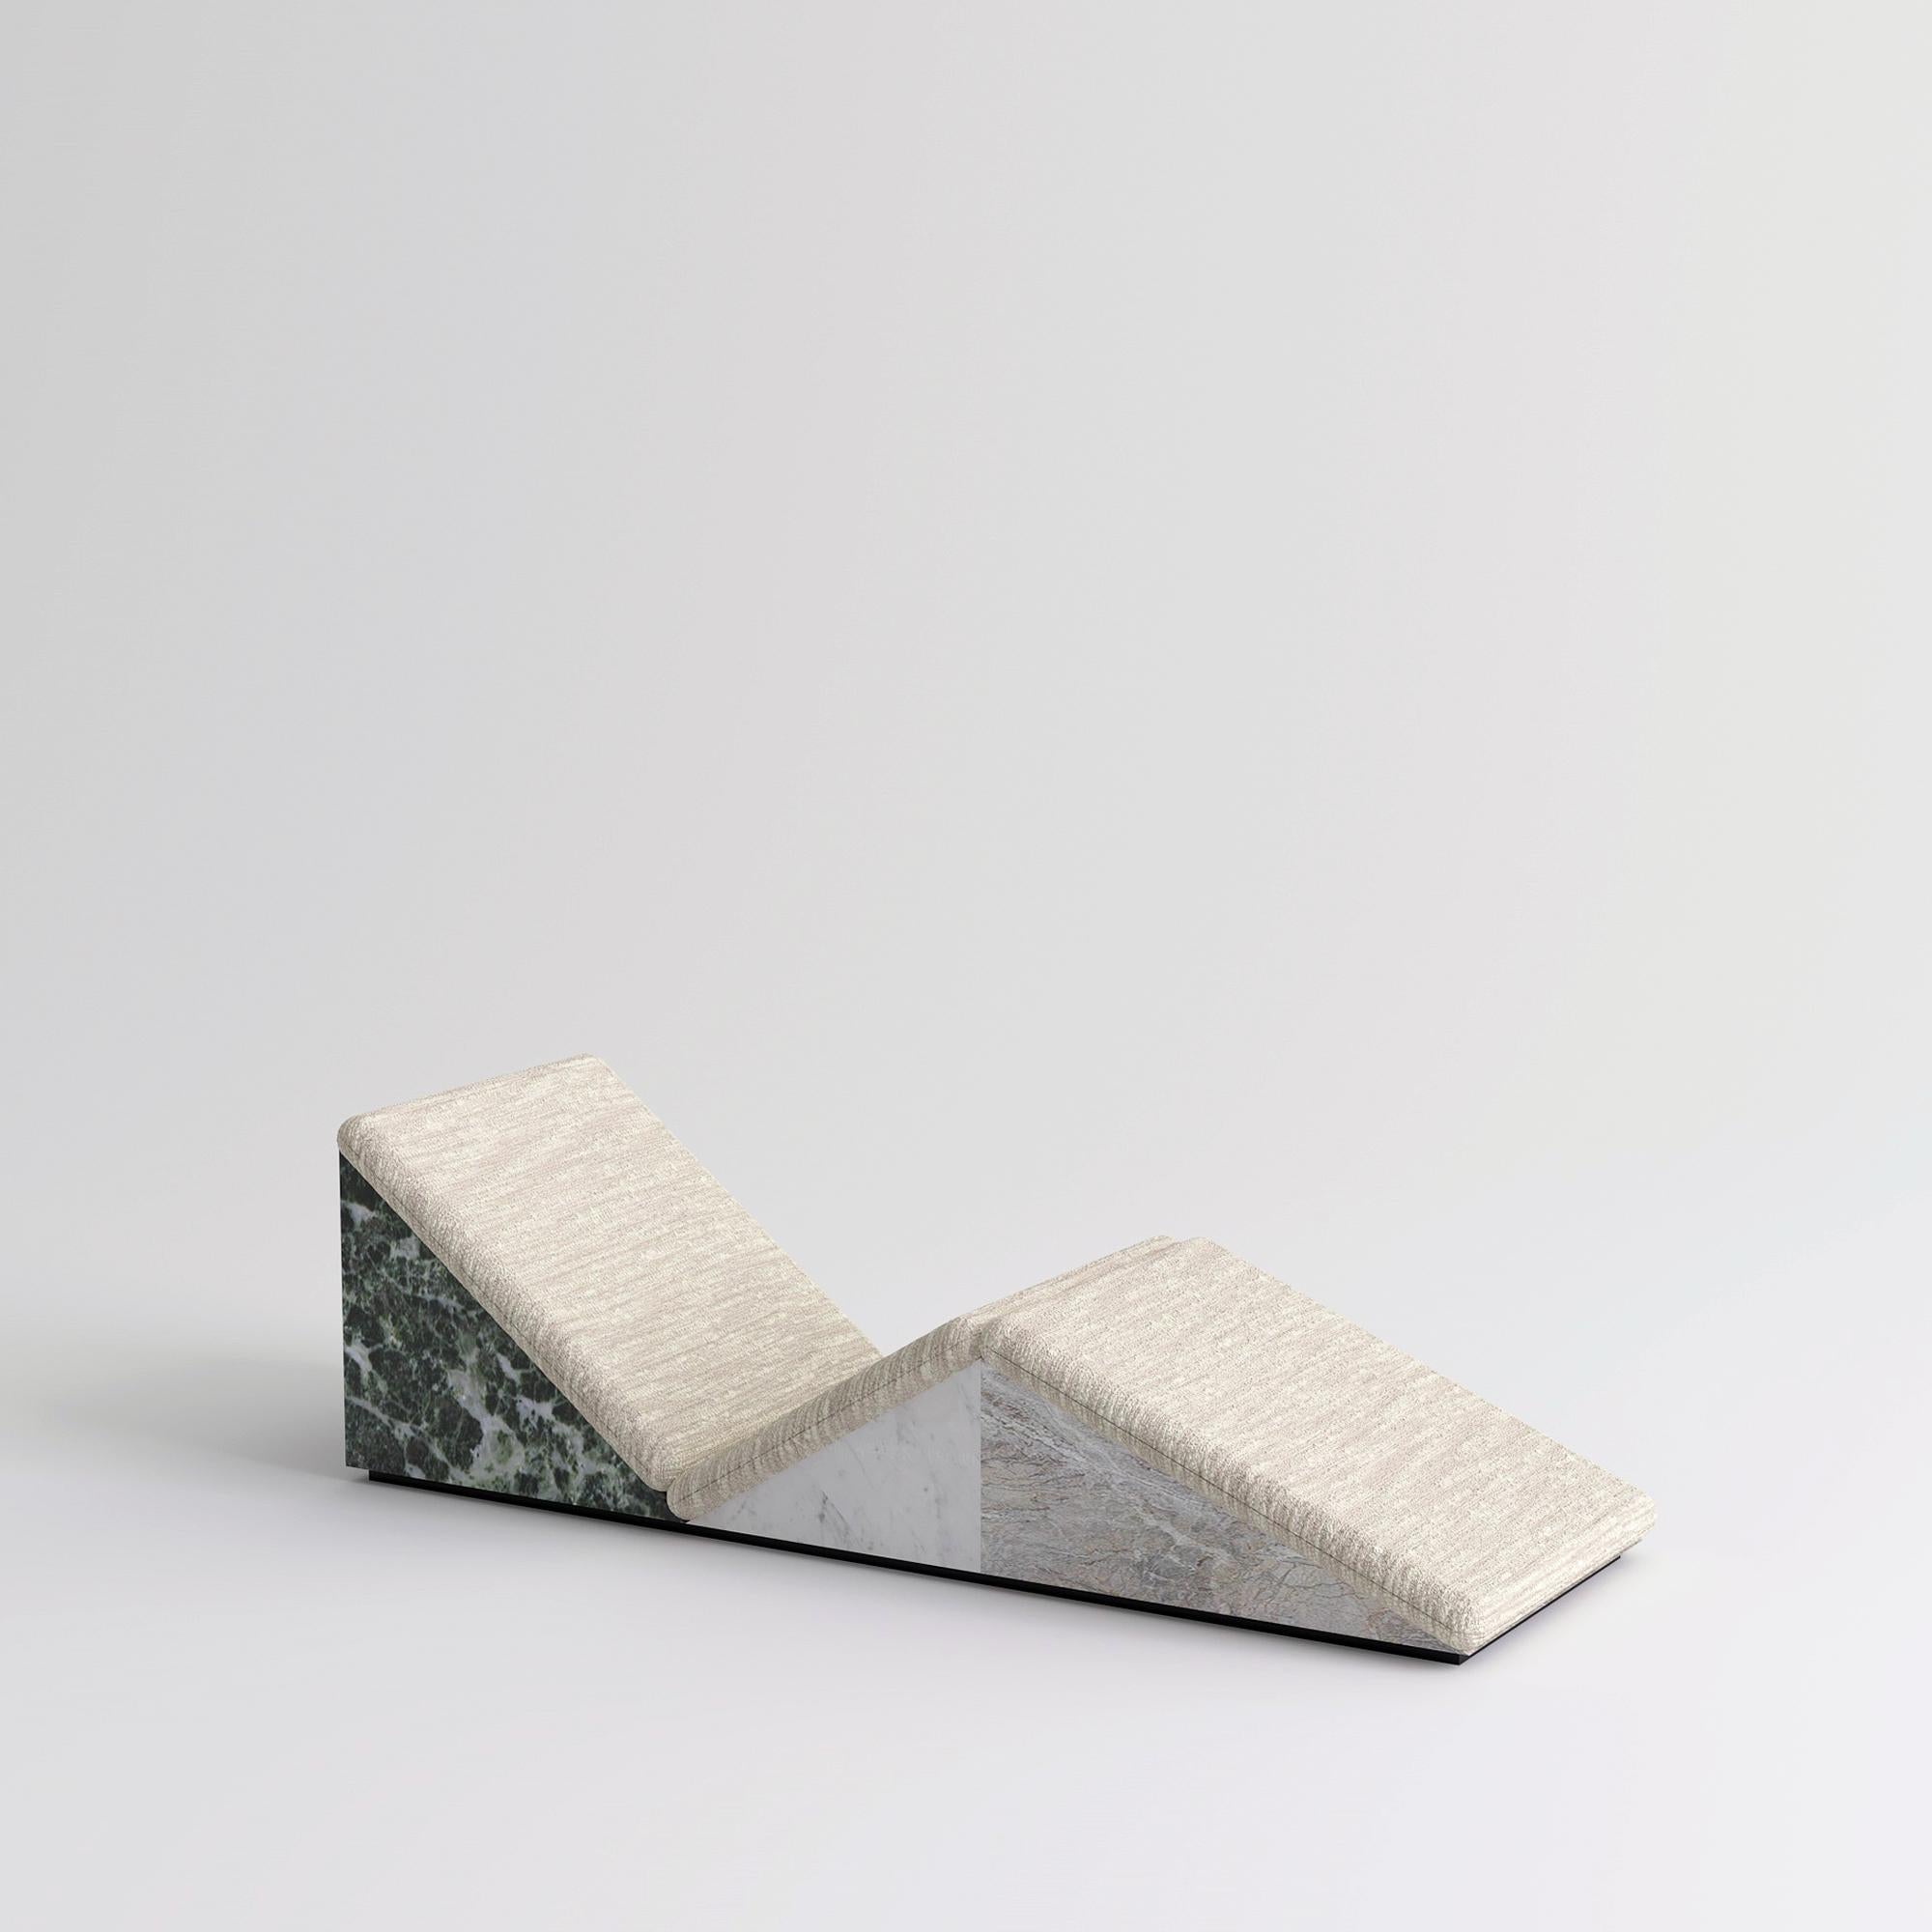 Marmini I chaise longue, Hannes Peer
Dimensions: 150 W x 50 D x 41 H cm
Materials: verde alpi marble, white carrara marble, fior di pesco marble, Lelièvre Helsinki fabric

Marmini I is an uncompromised architectural lounge chair built in Verde